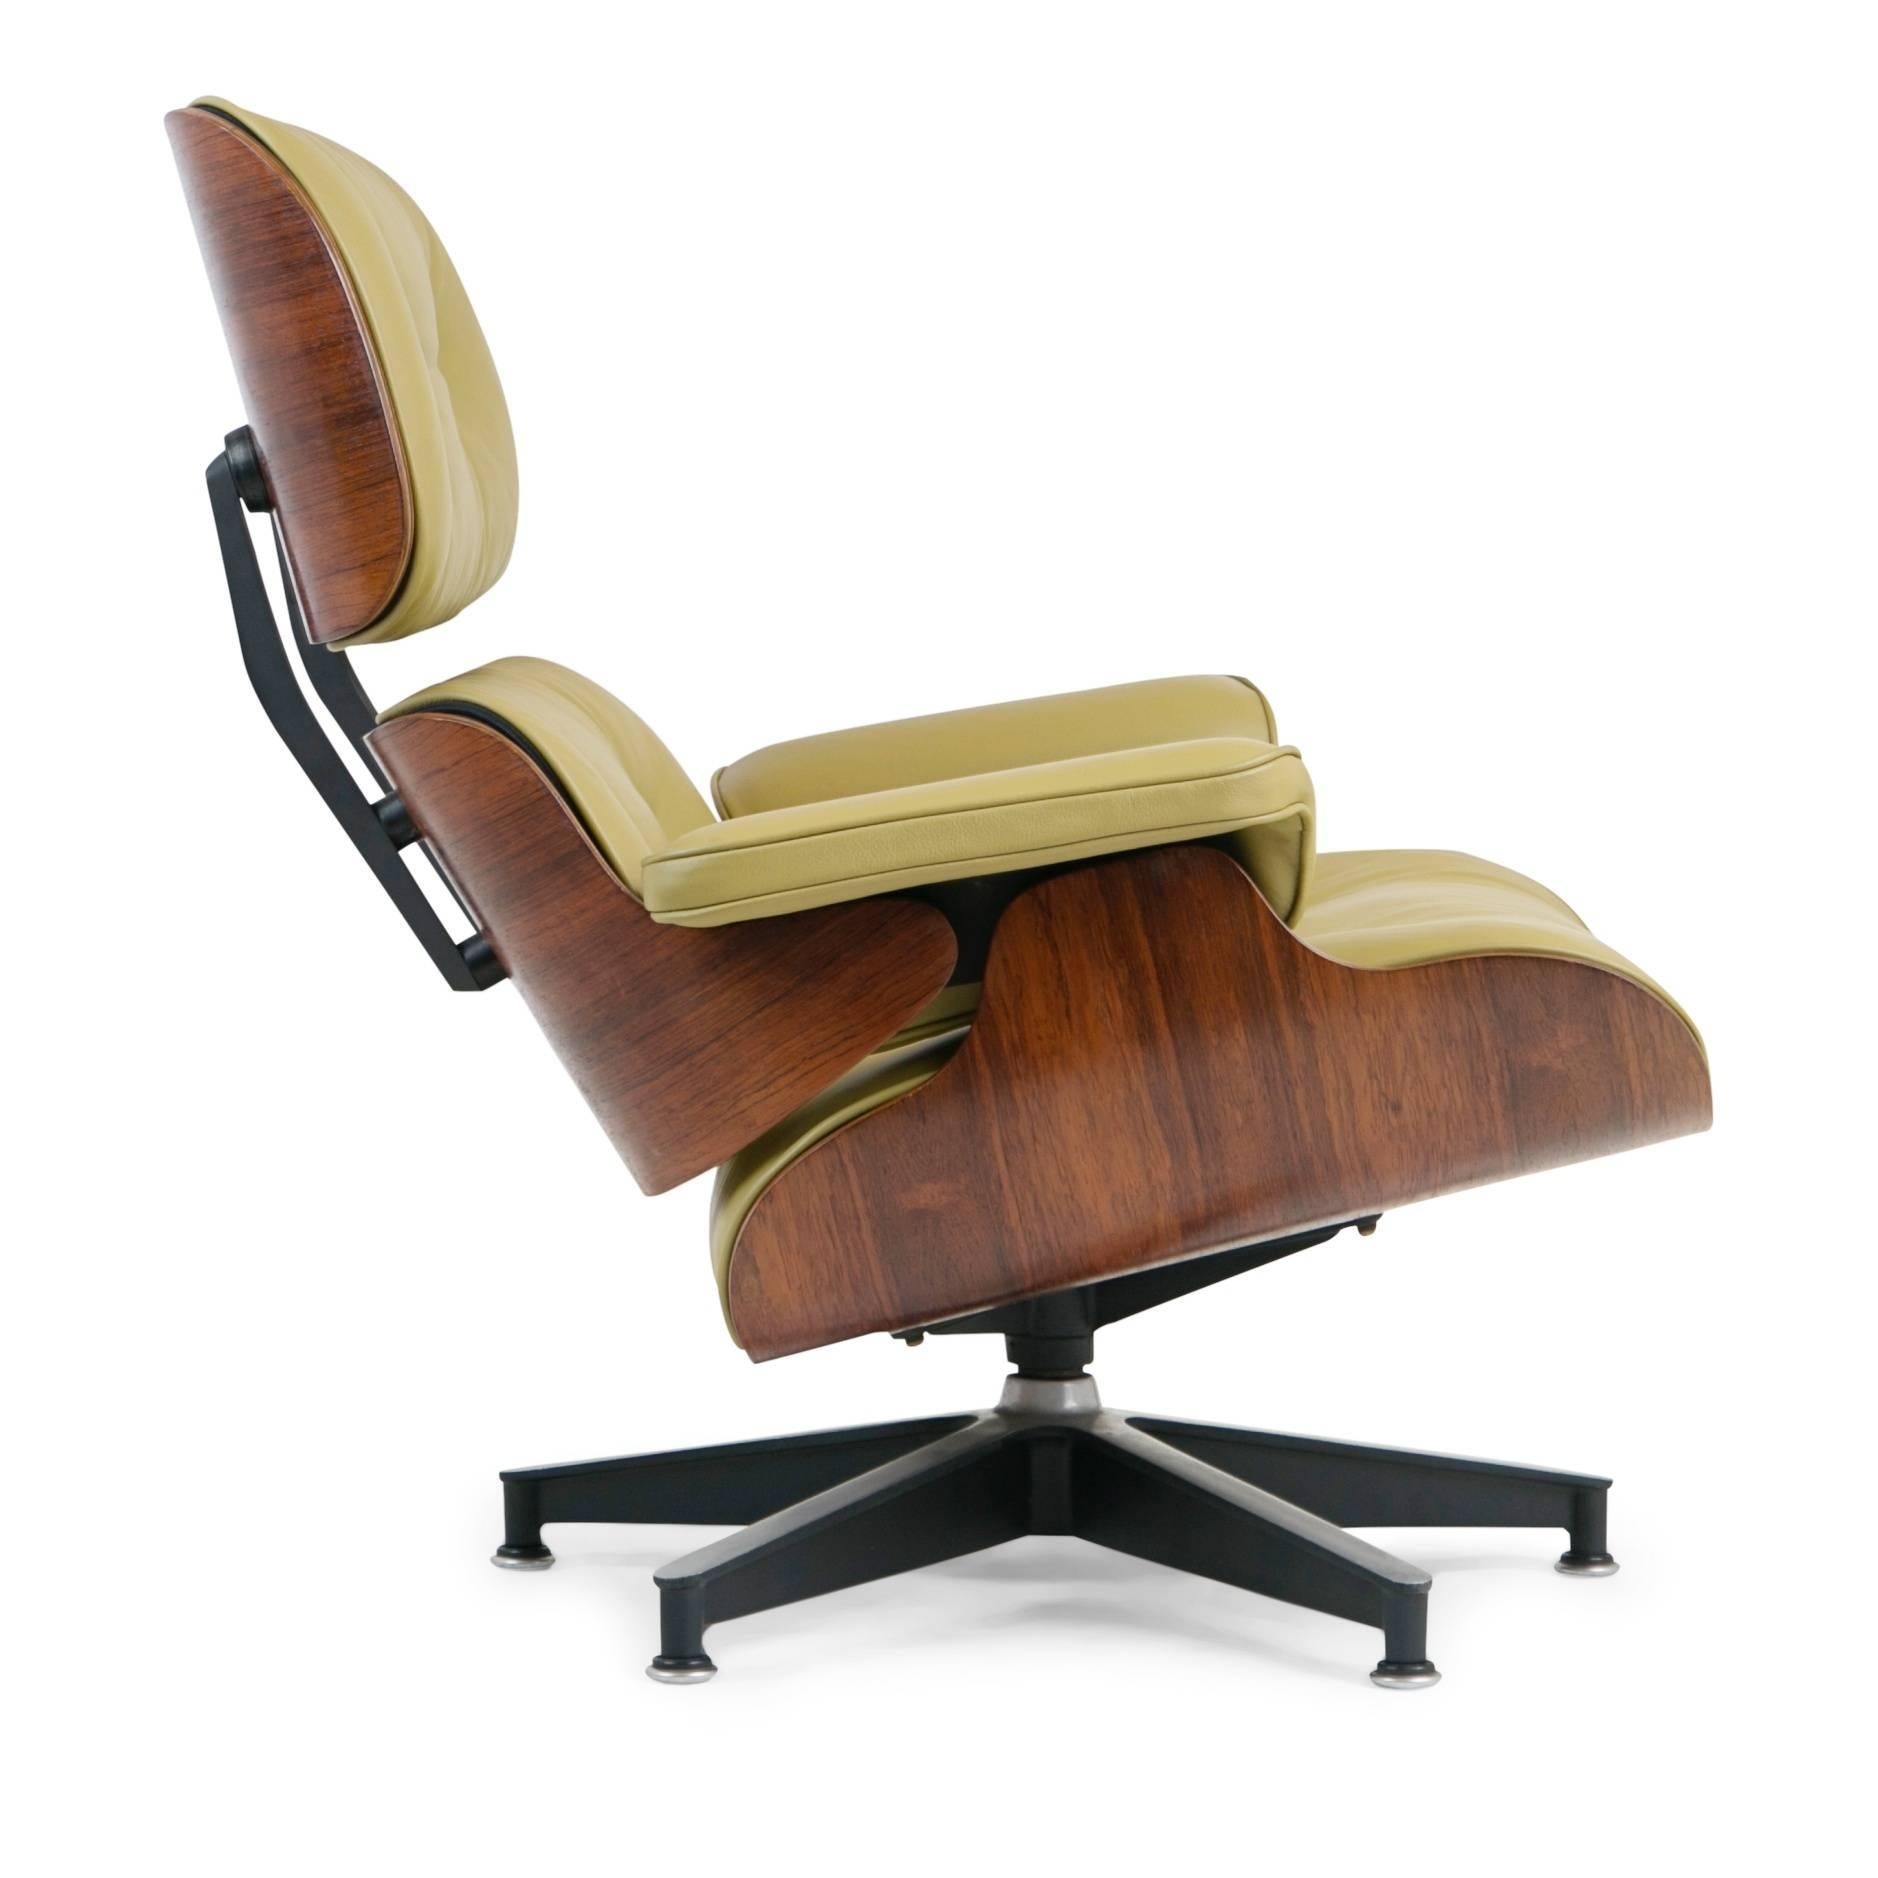 Early Production Model 670/671 Lounge Chair & Ottoman by Charles & Ray Eames (Mitte des 20. Jahrhunderts)